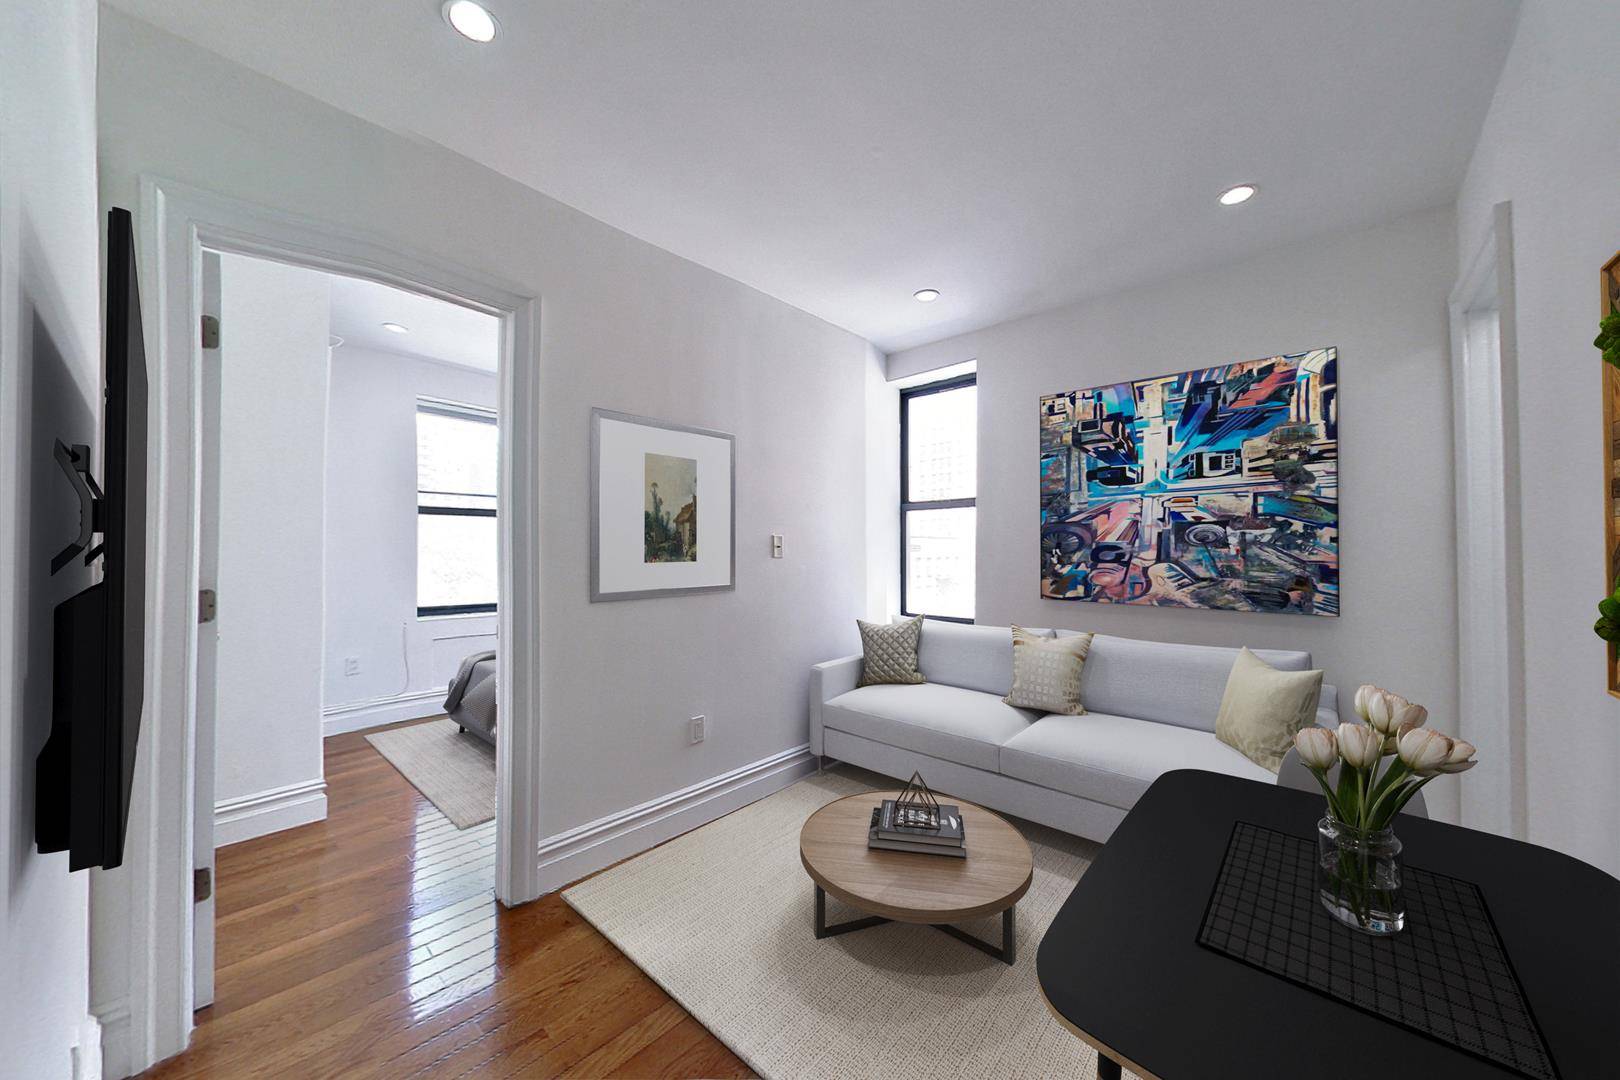 This newly renovated, cozy corner apartment is flooded with sunlight and features recessed lighting and new wide plank hardwood flooring throughout.